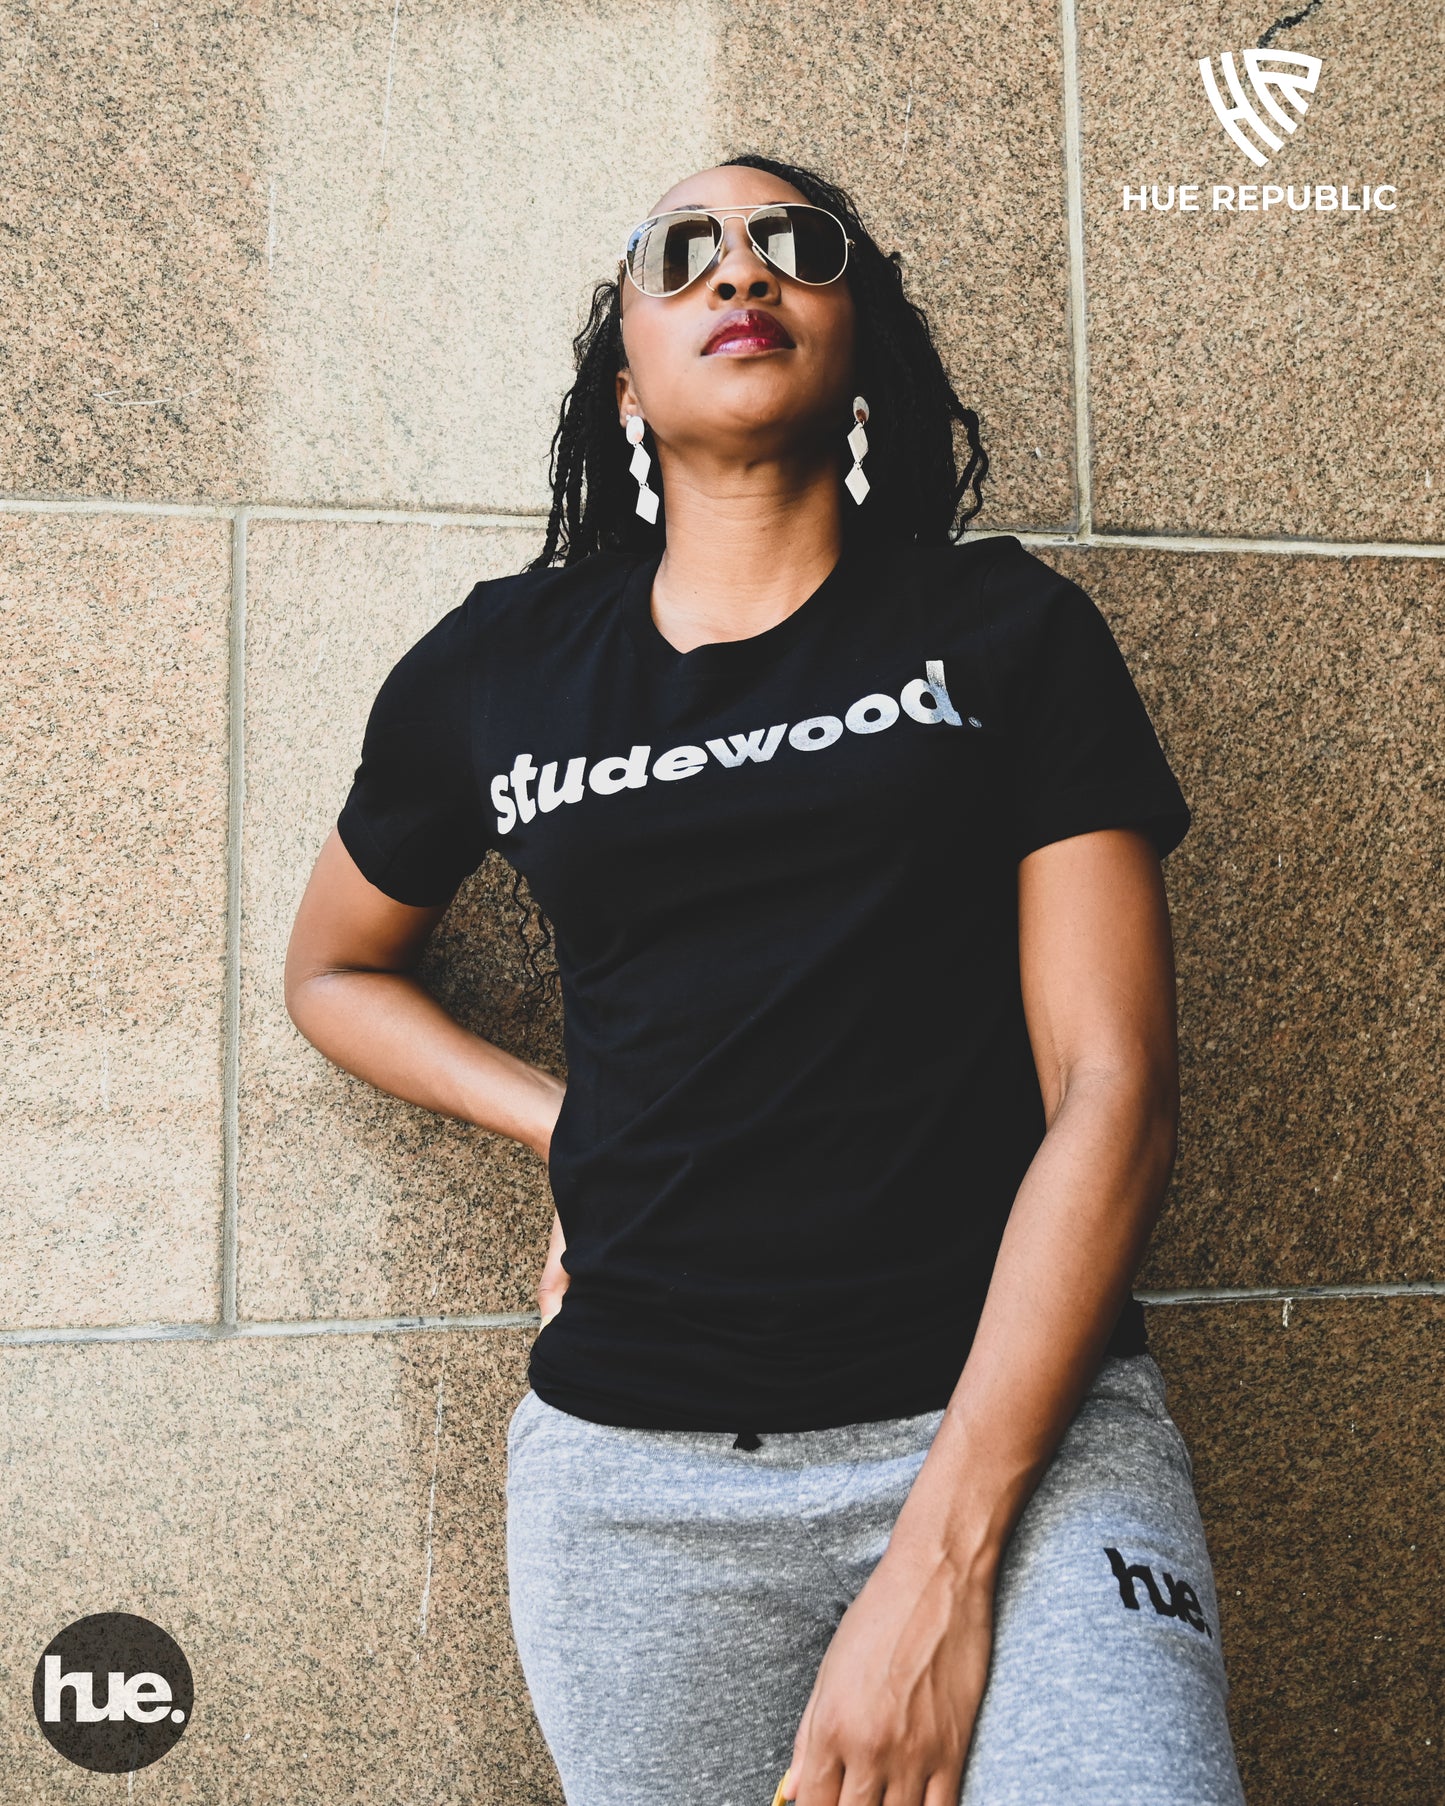 'Studewood Hue' North Side Collection T-Shirt (Unisex) *LIMITED QUANTITIES*